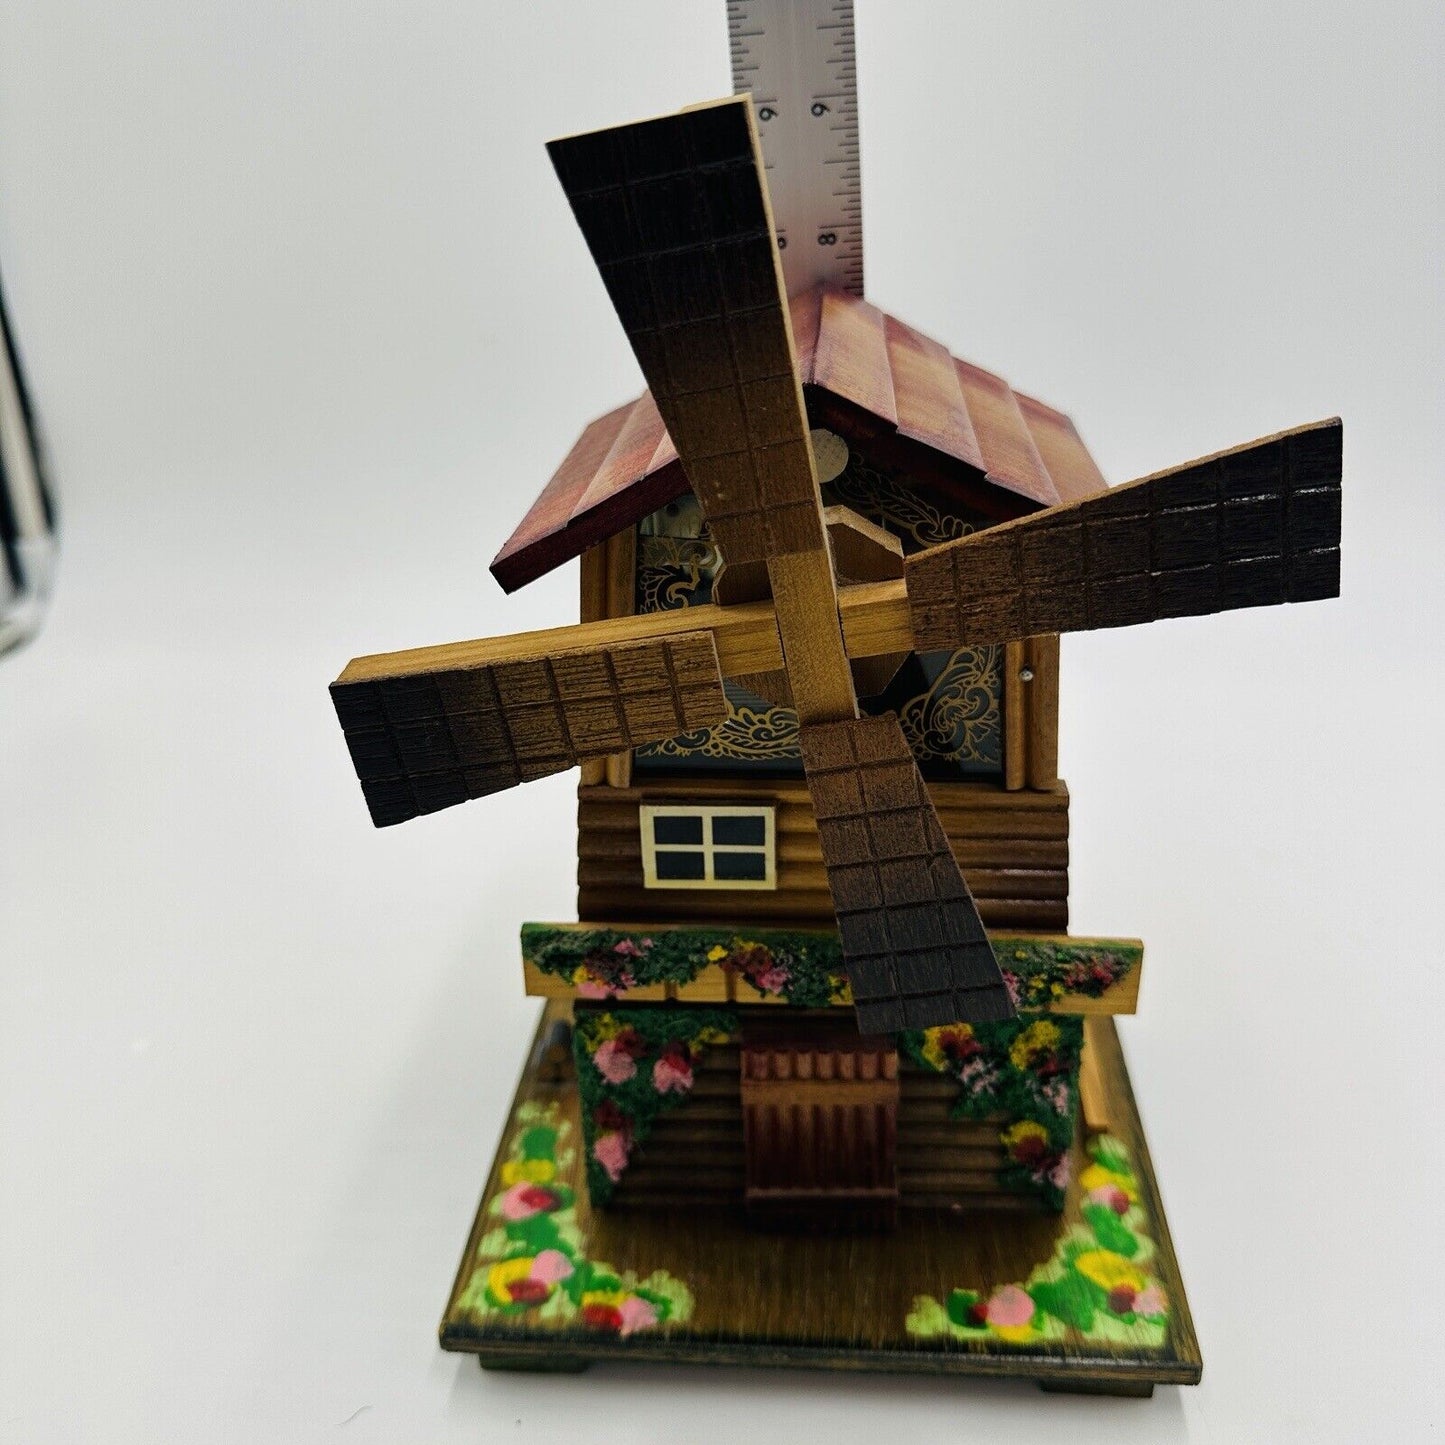 Wooden Jewelry Wood Box Windmill Shaped Dutch Vintage Hand-painted Home Decor